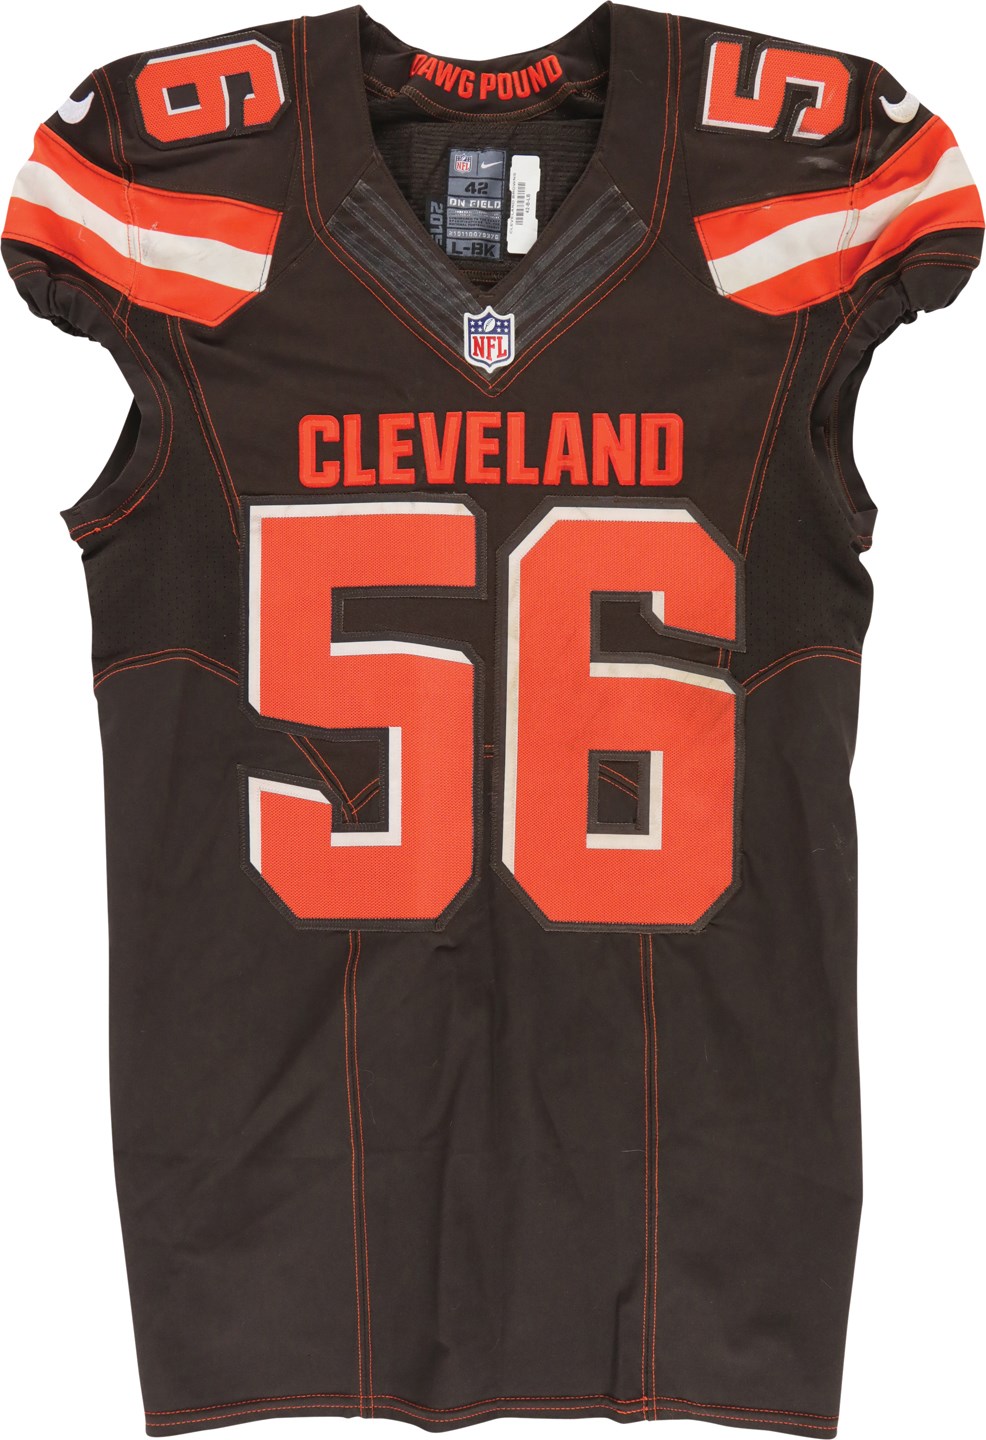 Football - 11/30/15 Karlos Dansby Unwashed Cleveland Browns Game Worn Jersey - 52 Yard Interception Touchdown! (Photo-Matched)